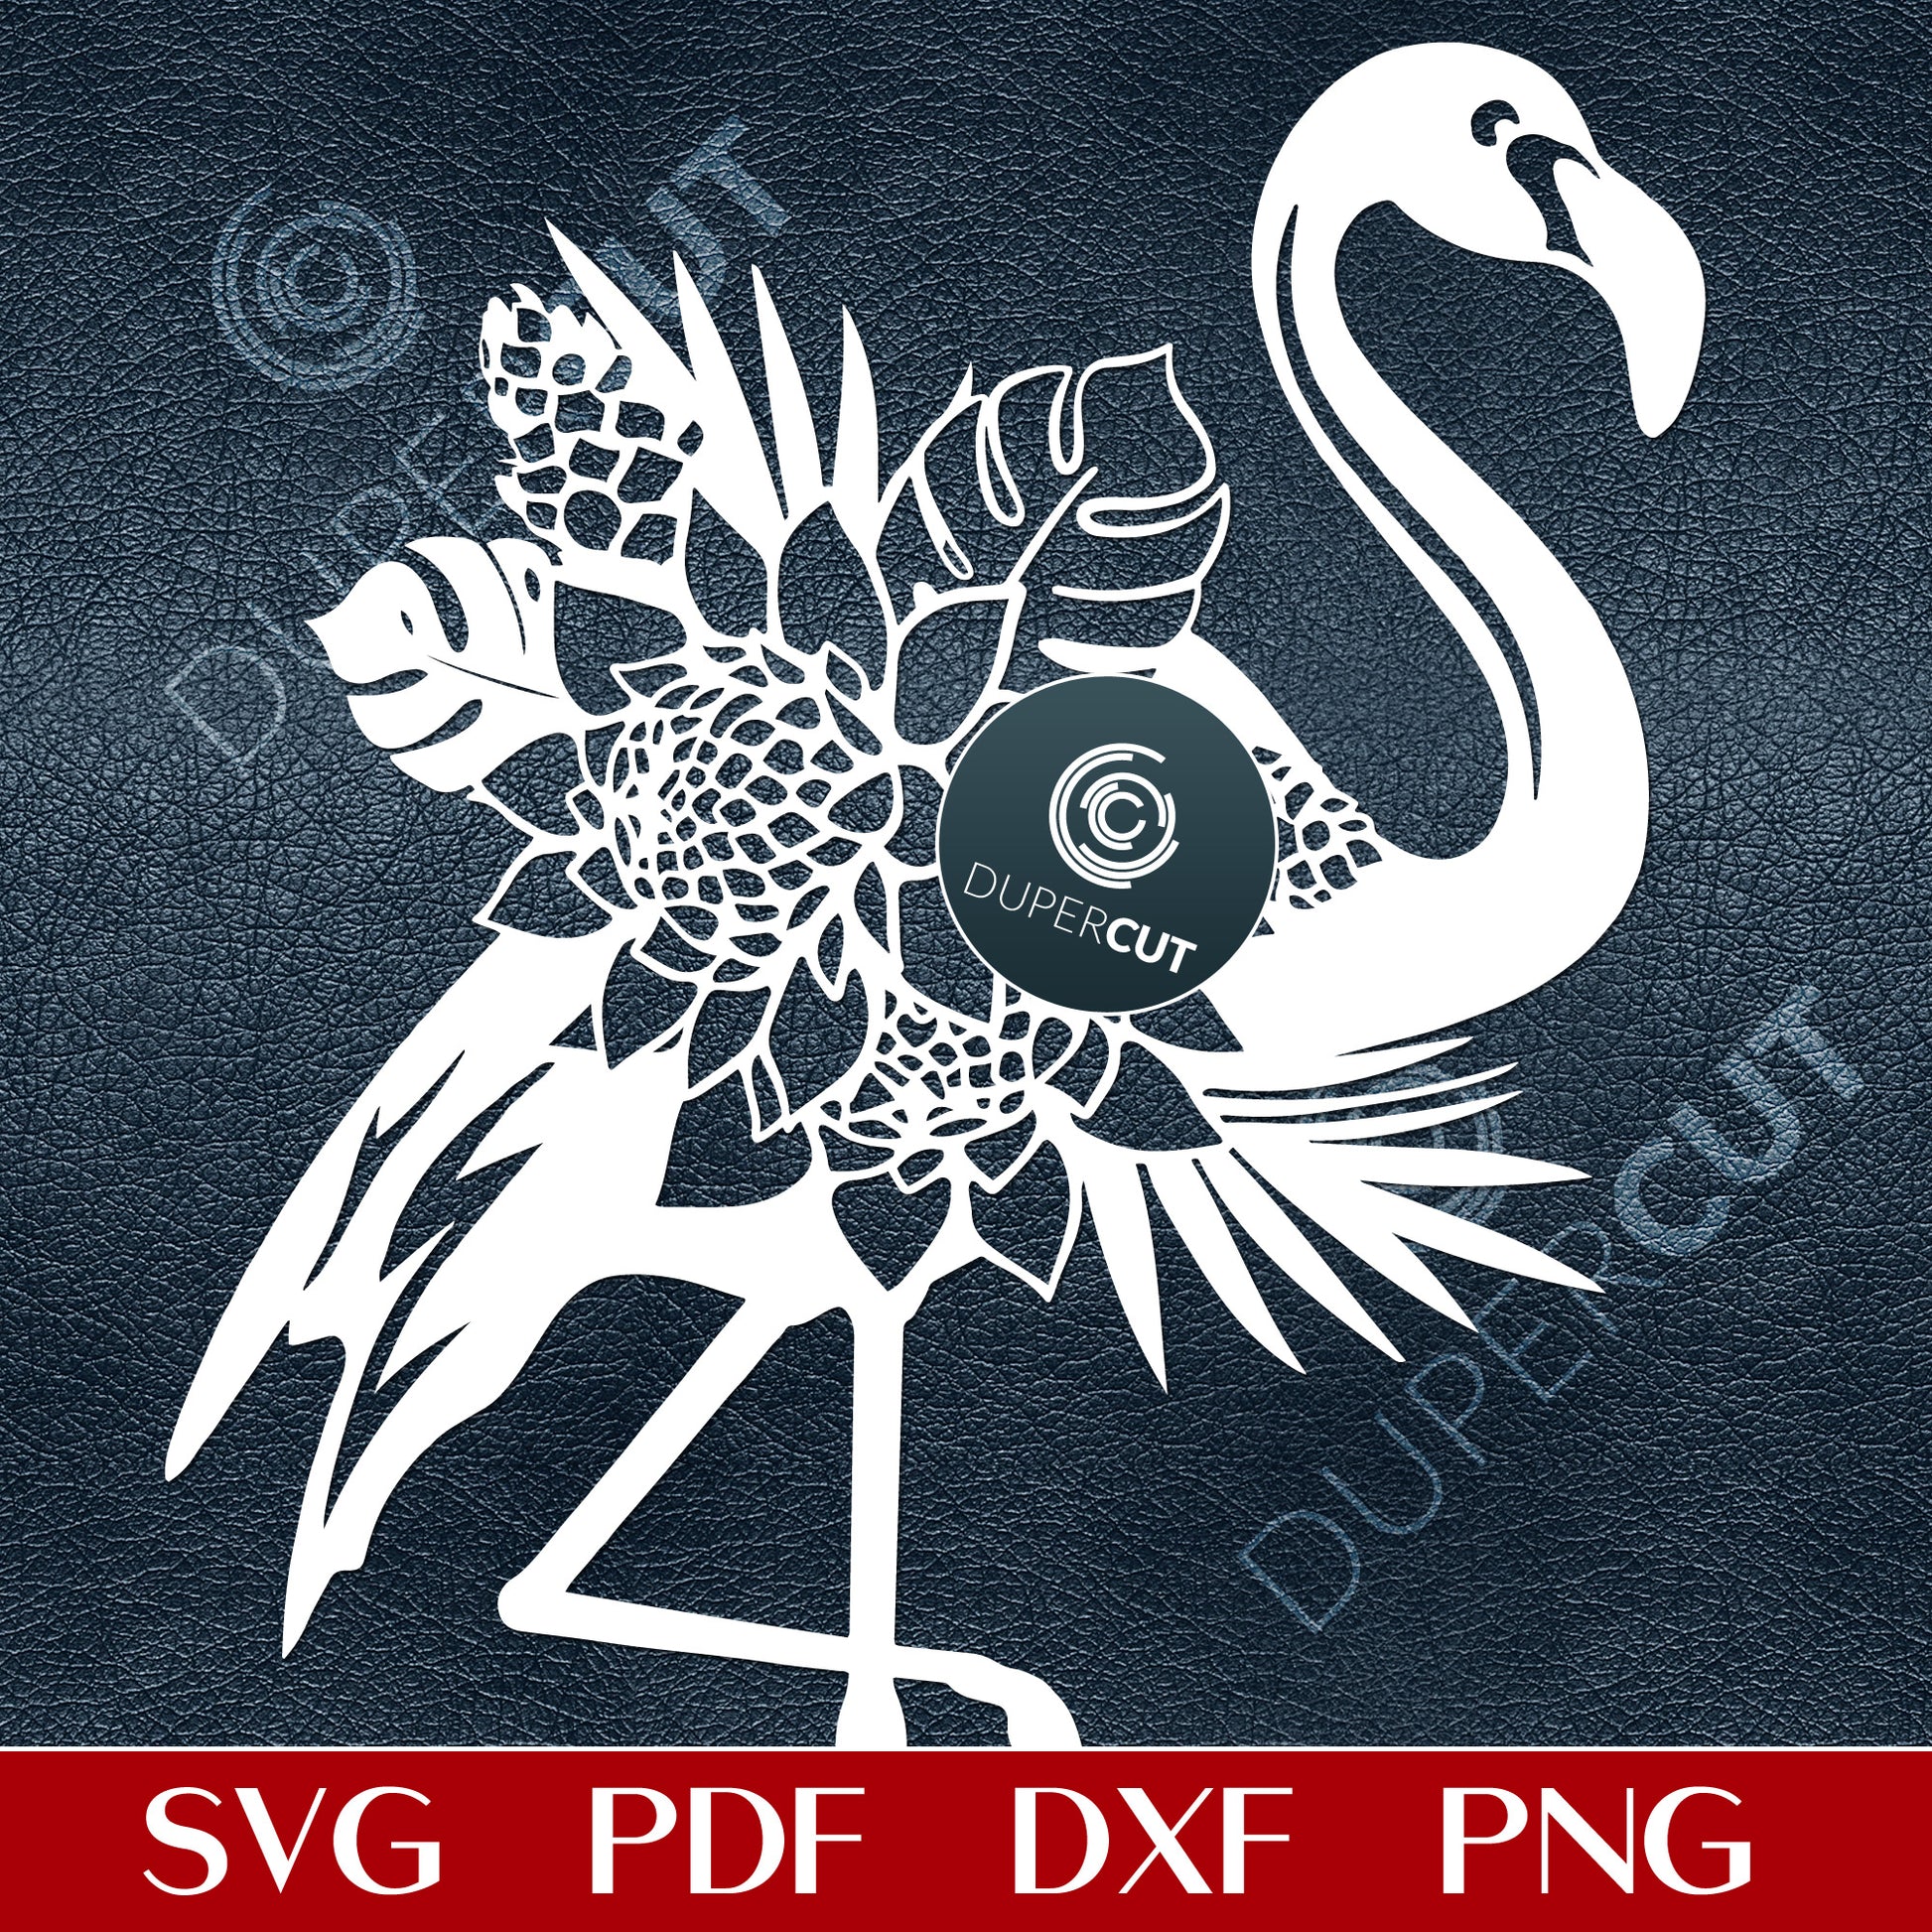 Tropical floral Flamingo - paper cutting template SVG PNG DXF vector files for sublimation, laser engraving and cutting with Glowforge, Cricut, Silhouette Cameo